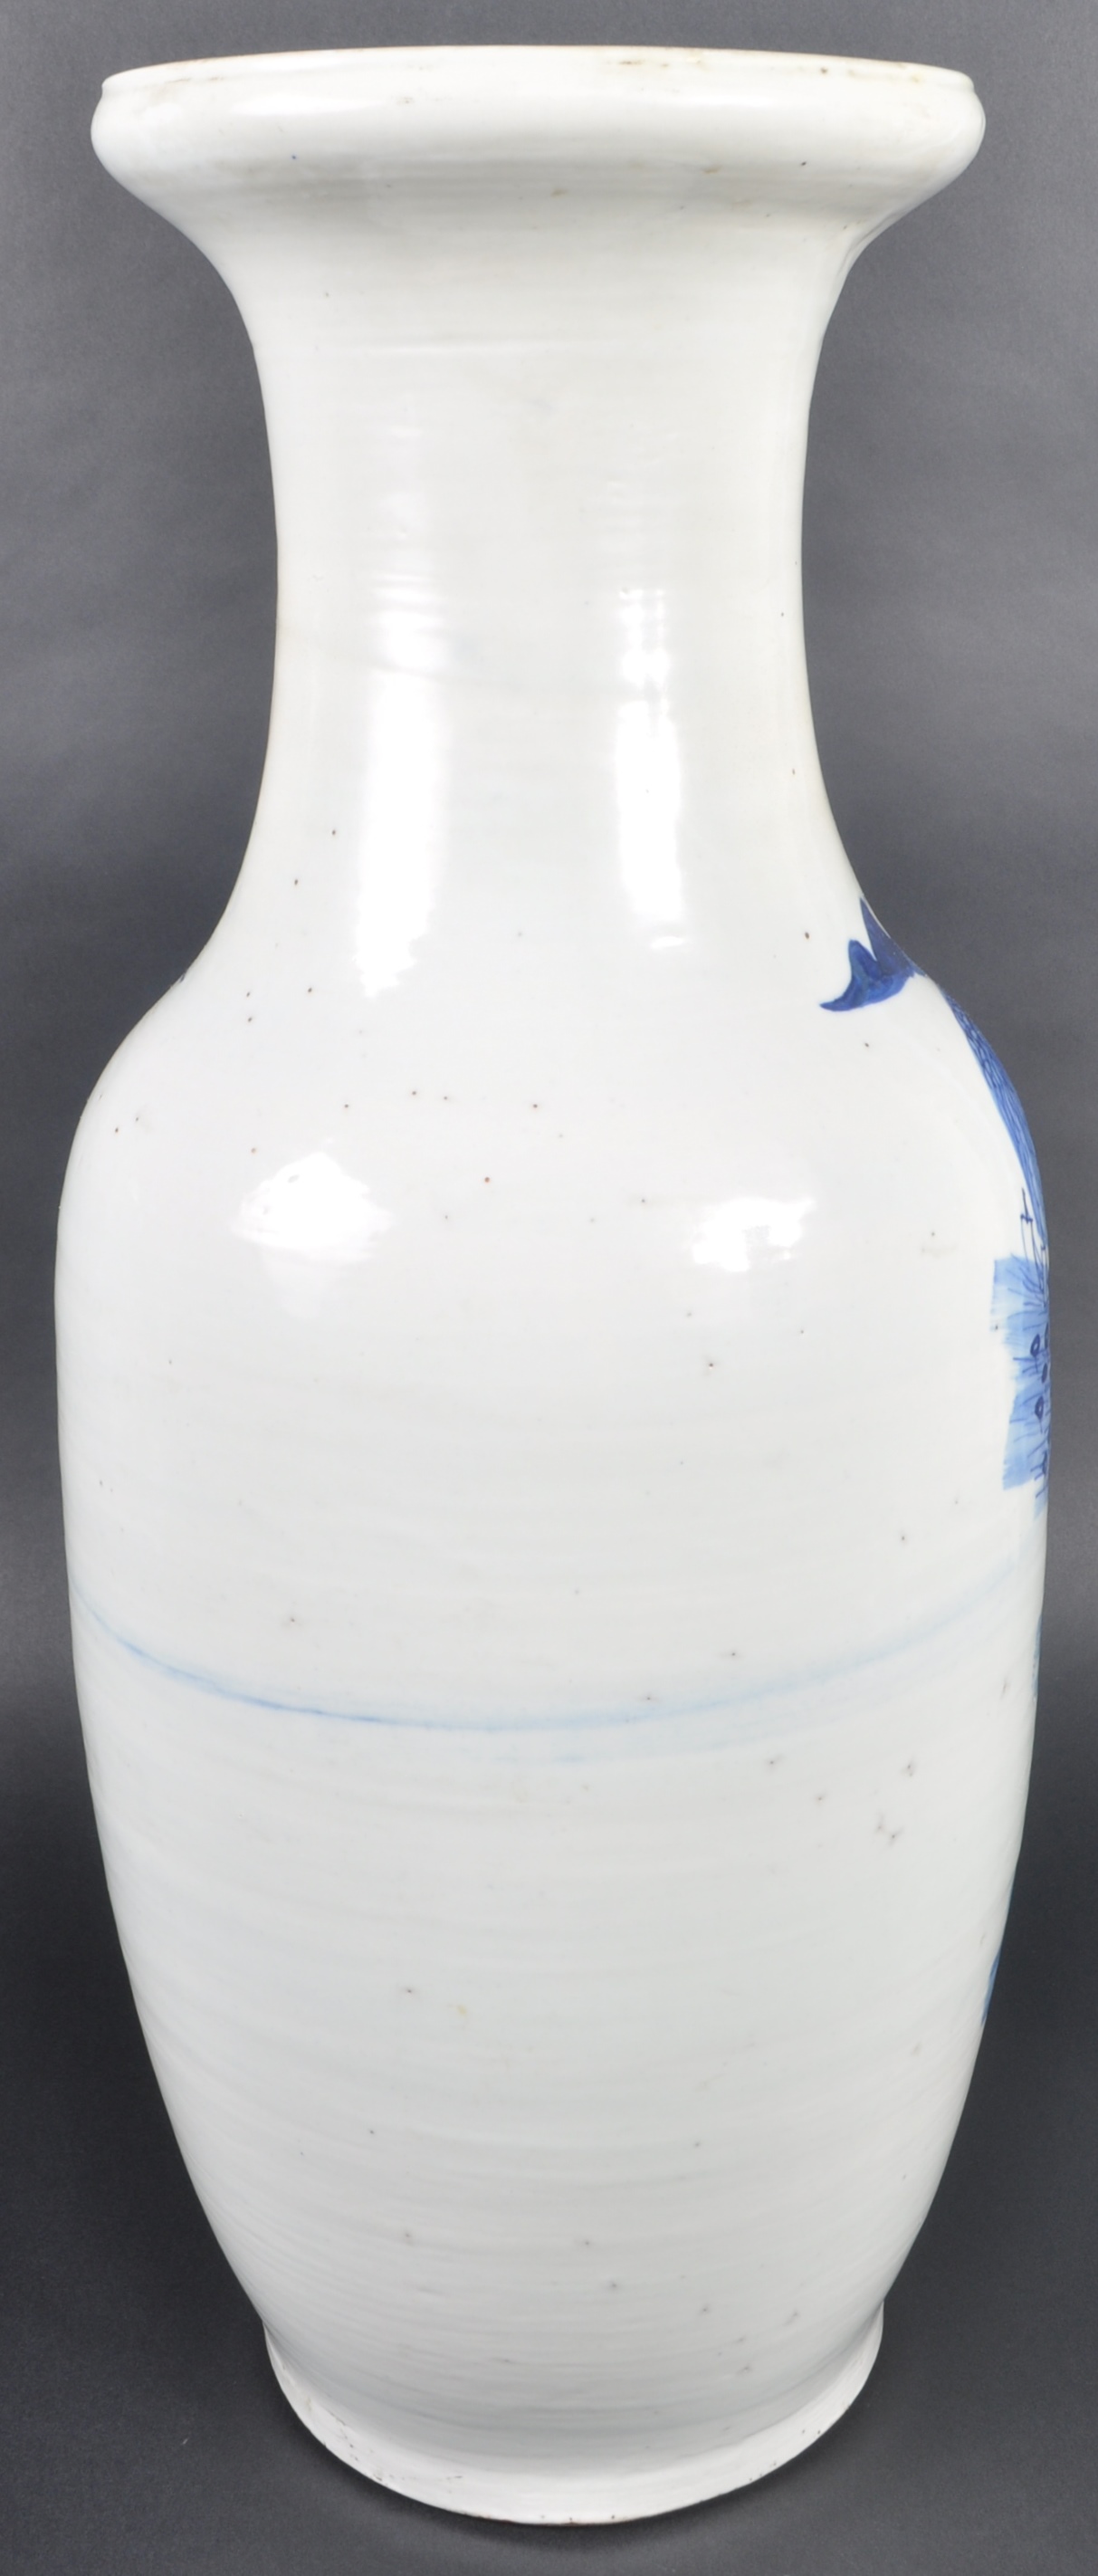 LARGE 19TH CENTURY CHINESE QING DYNASTY BLUE AND WHITE VASE - Image 10 of 12